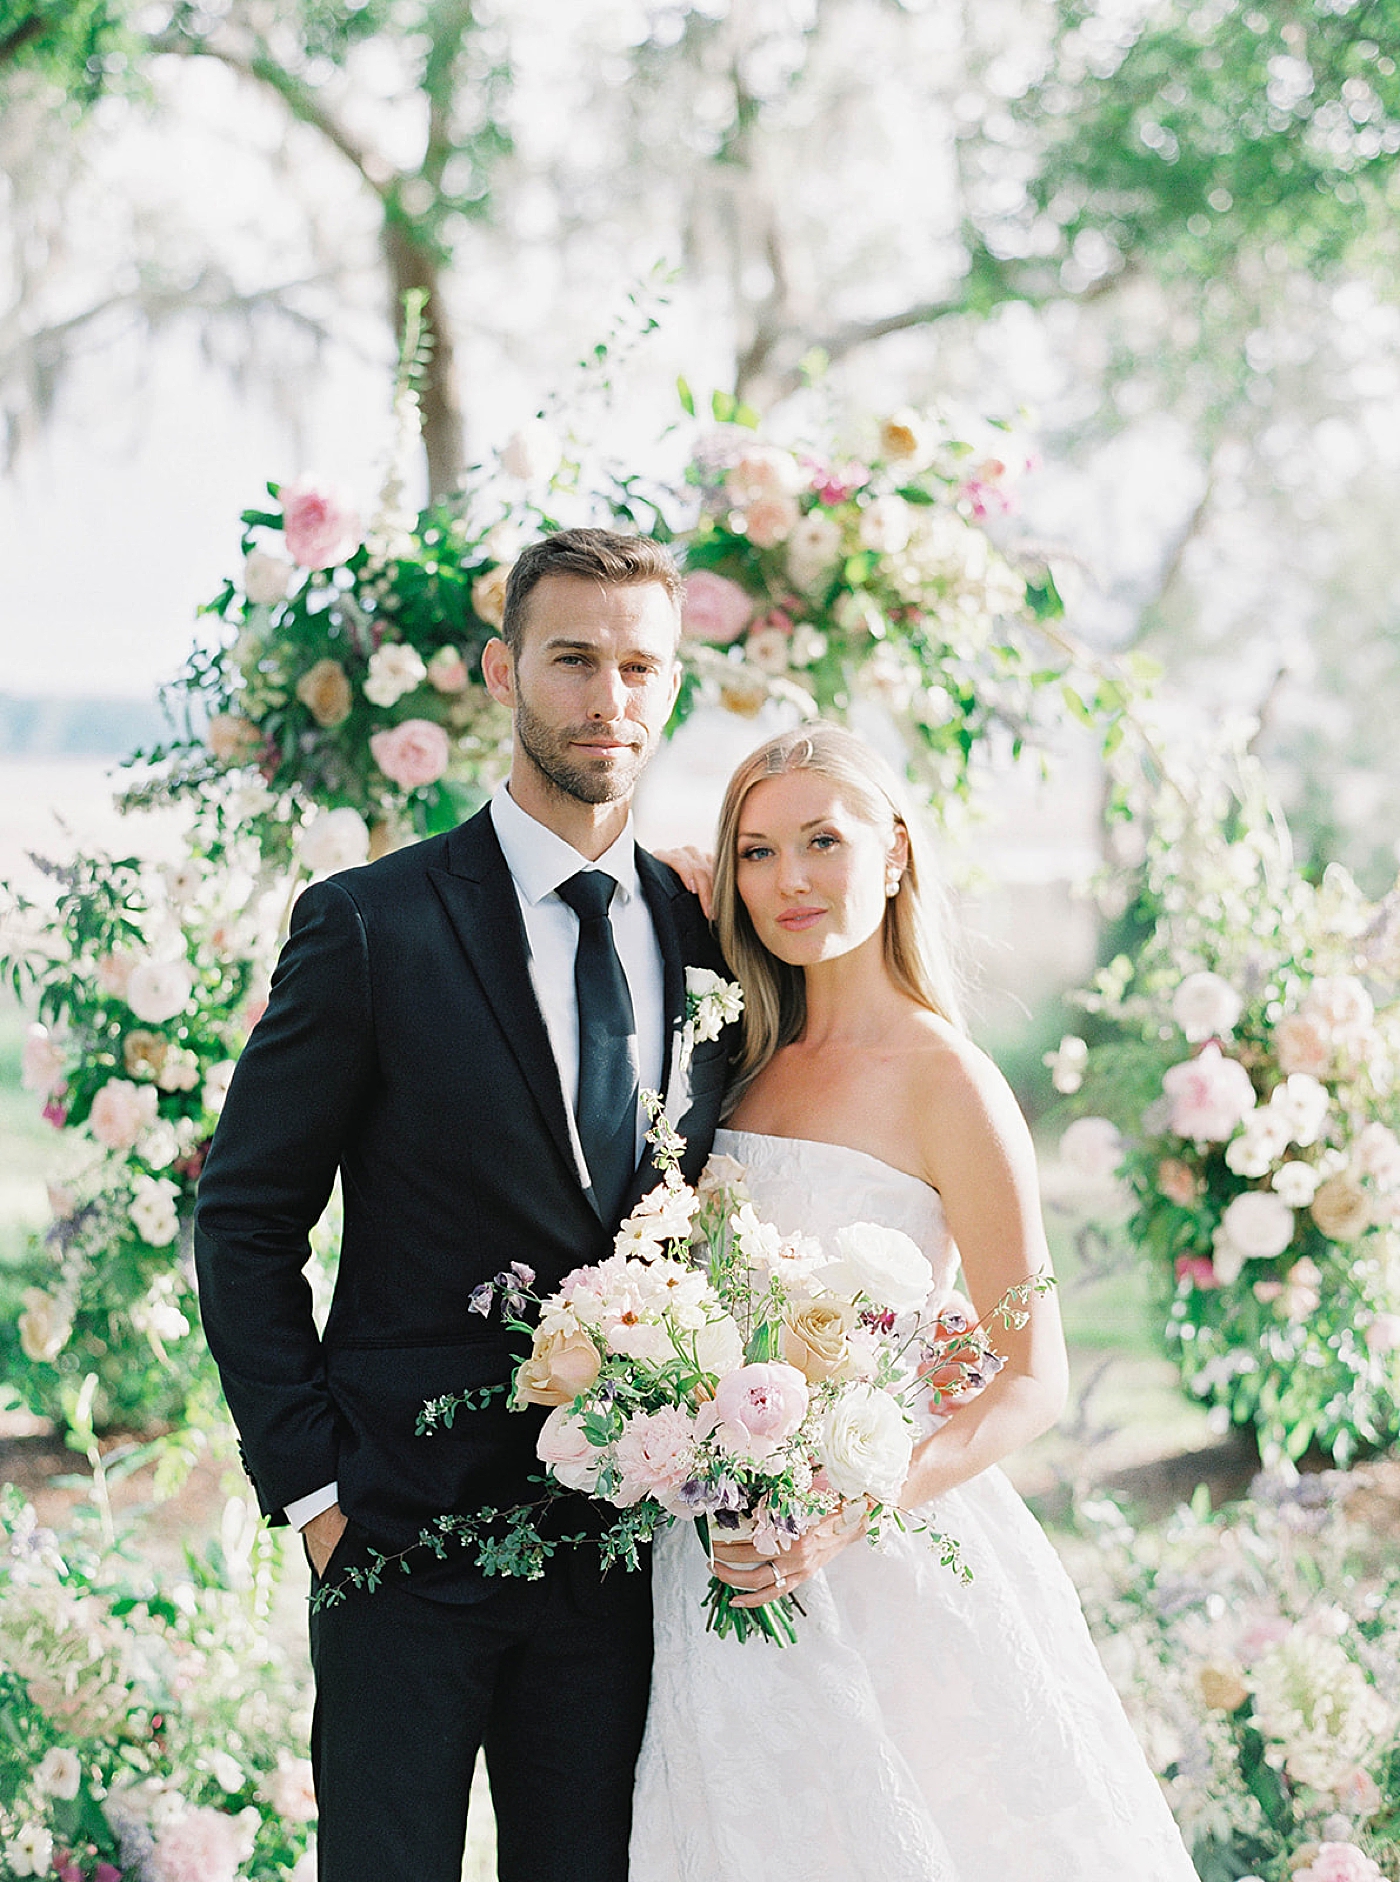 Bride and groom posing in front of floral arbor | Carters Event Co